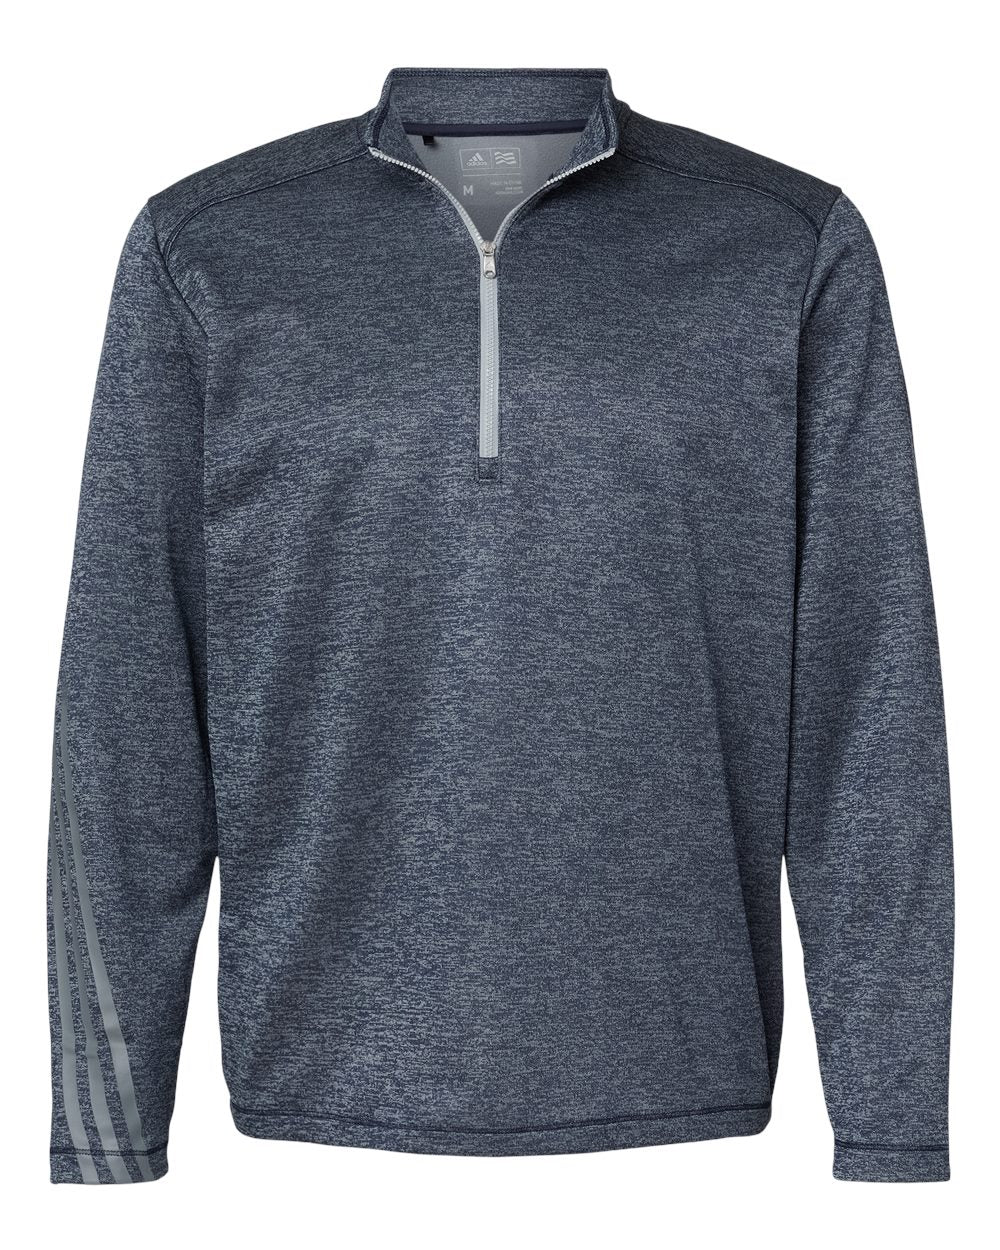 Adidas A284 Brushed Terry Heathered Quarter-Zip Pullover #color_Navy Heather/ Mid Grey